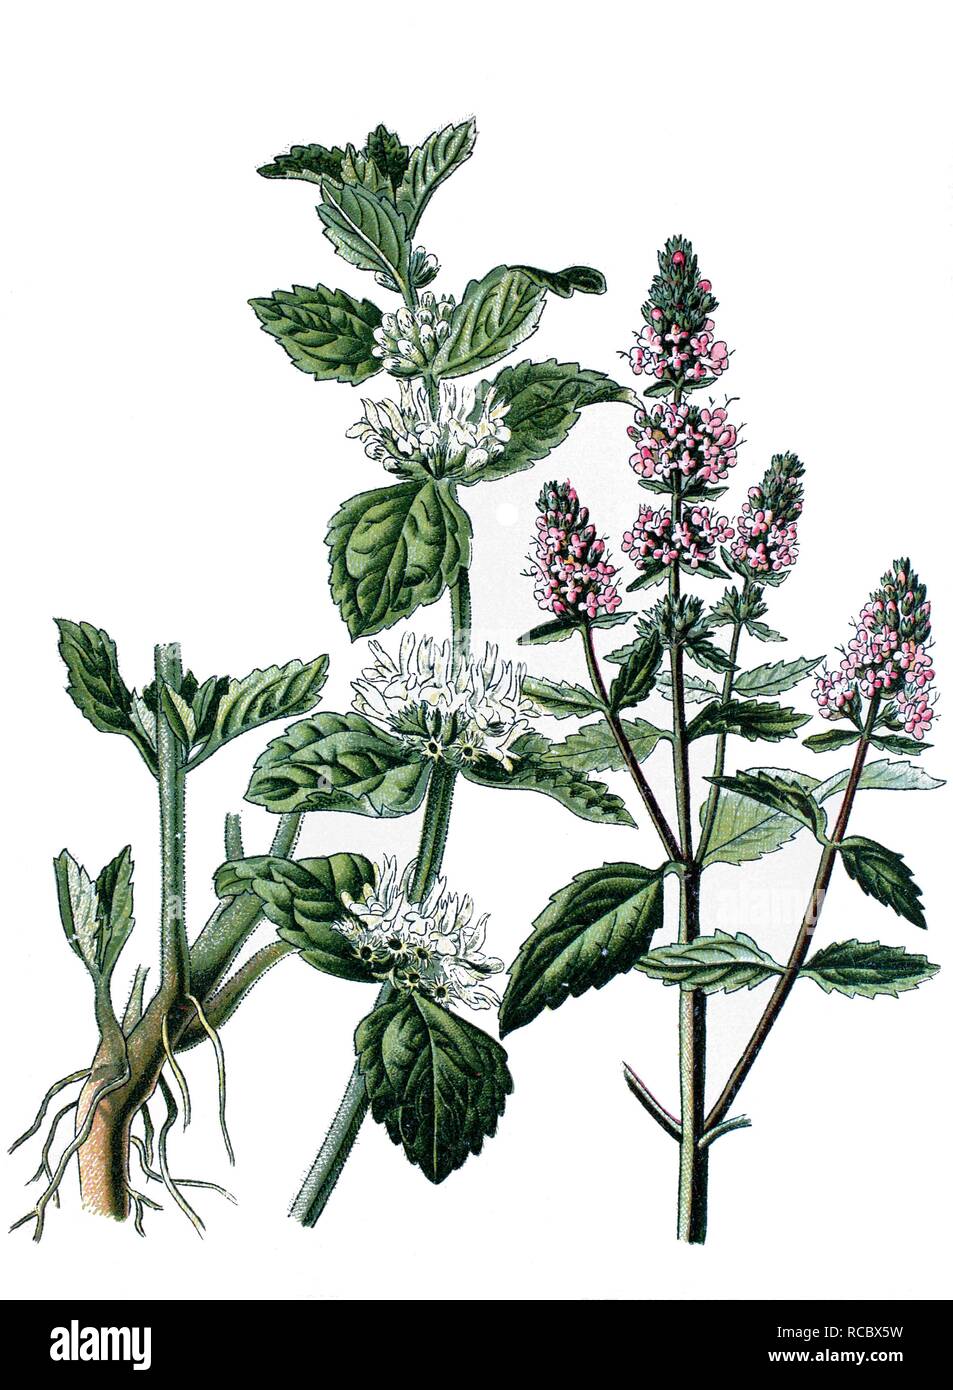 White horehound (Marrubium vulgare) on the left, peppermint (Mentha piperita) on the right, medicinal plants Stock Photo